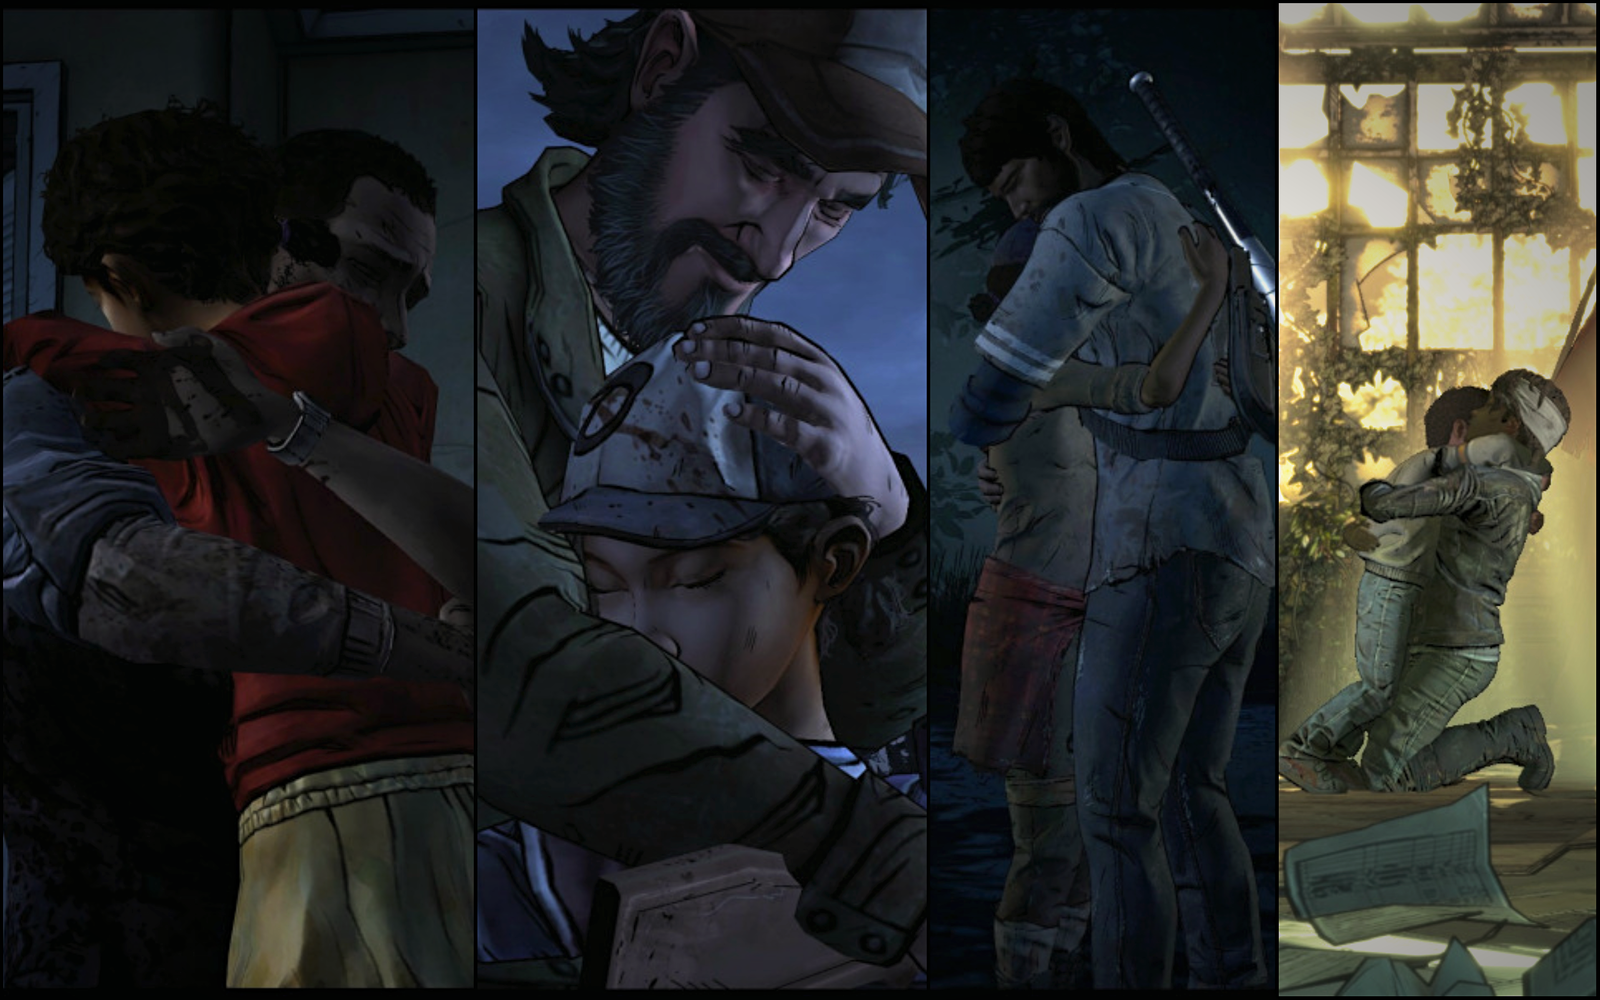 Those who are precious.. - Whether, Aljay, Javier, Kenny McCormick, Clementine, Games, the walking Dead